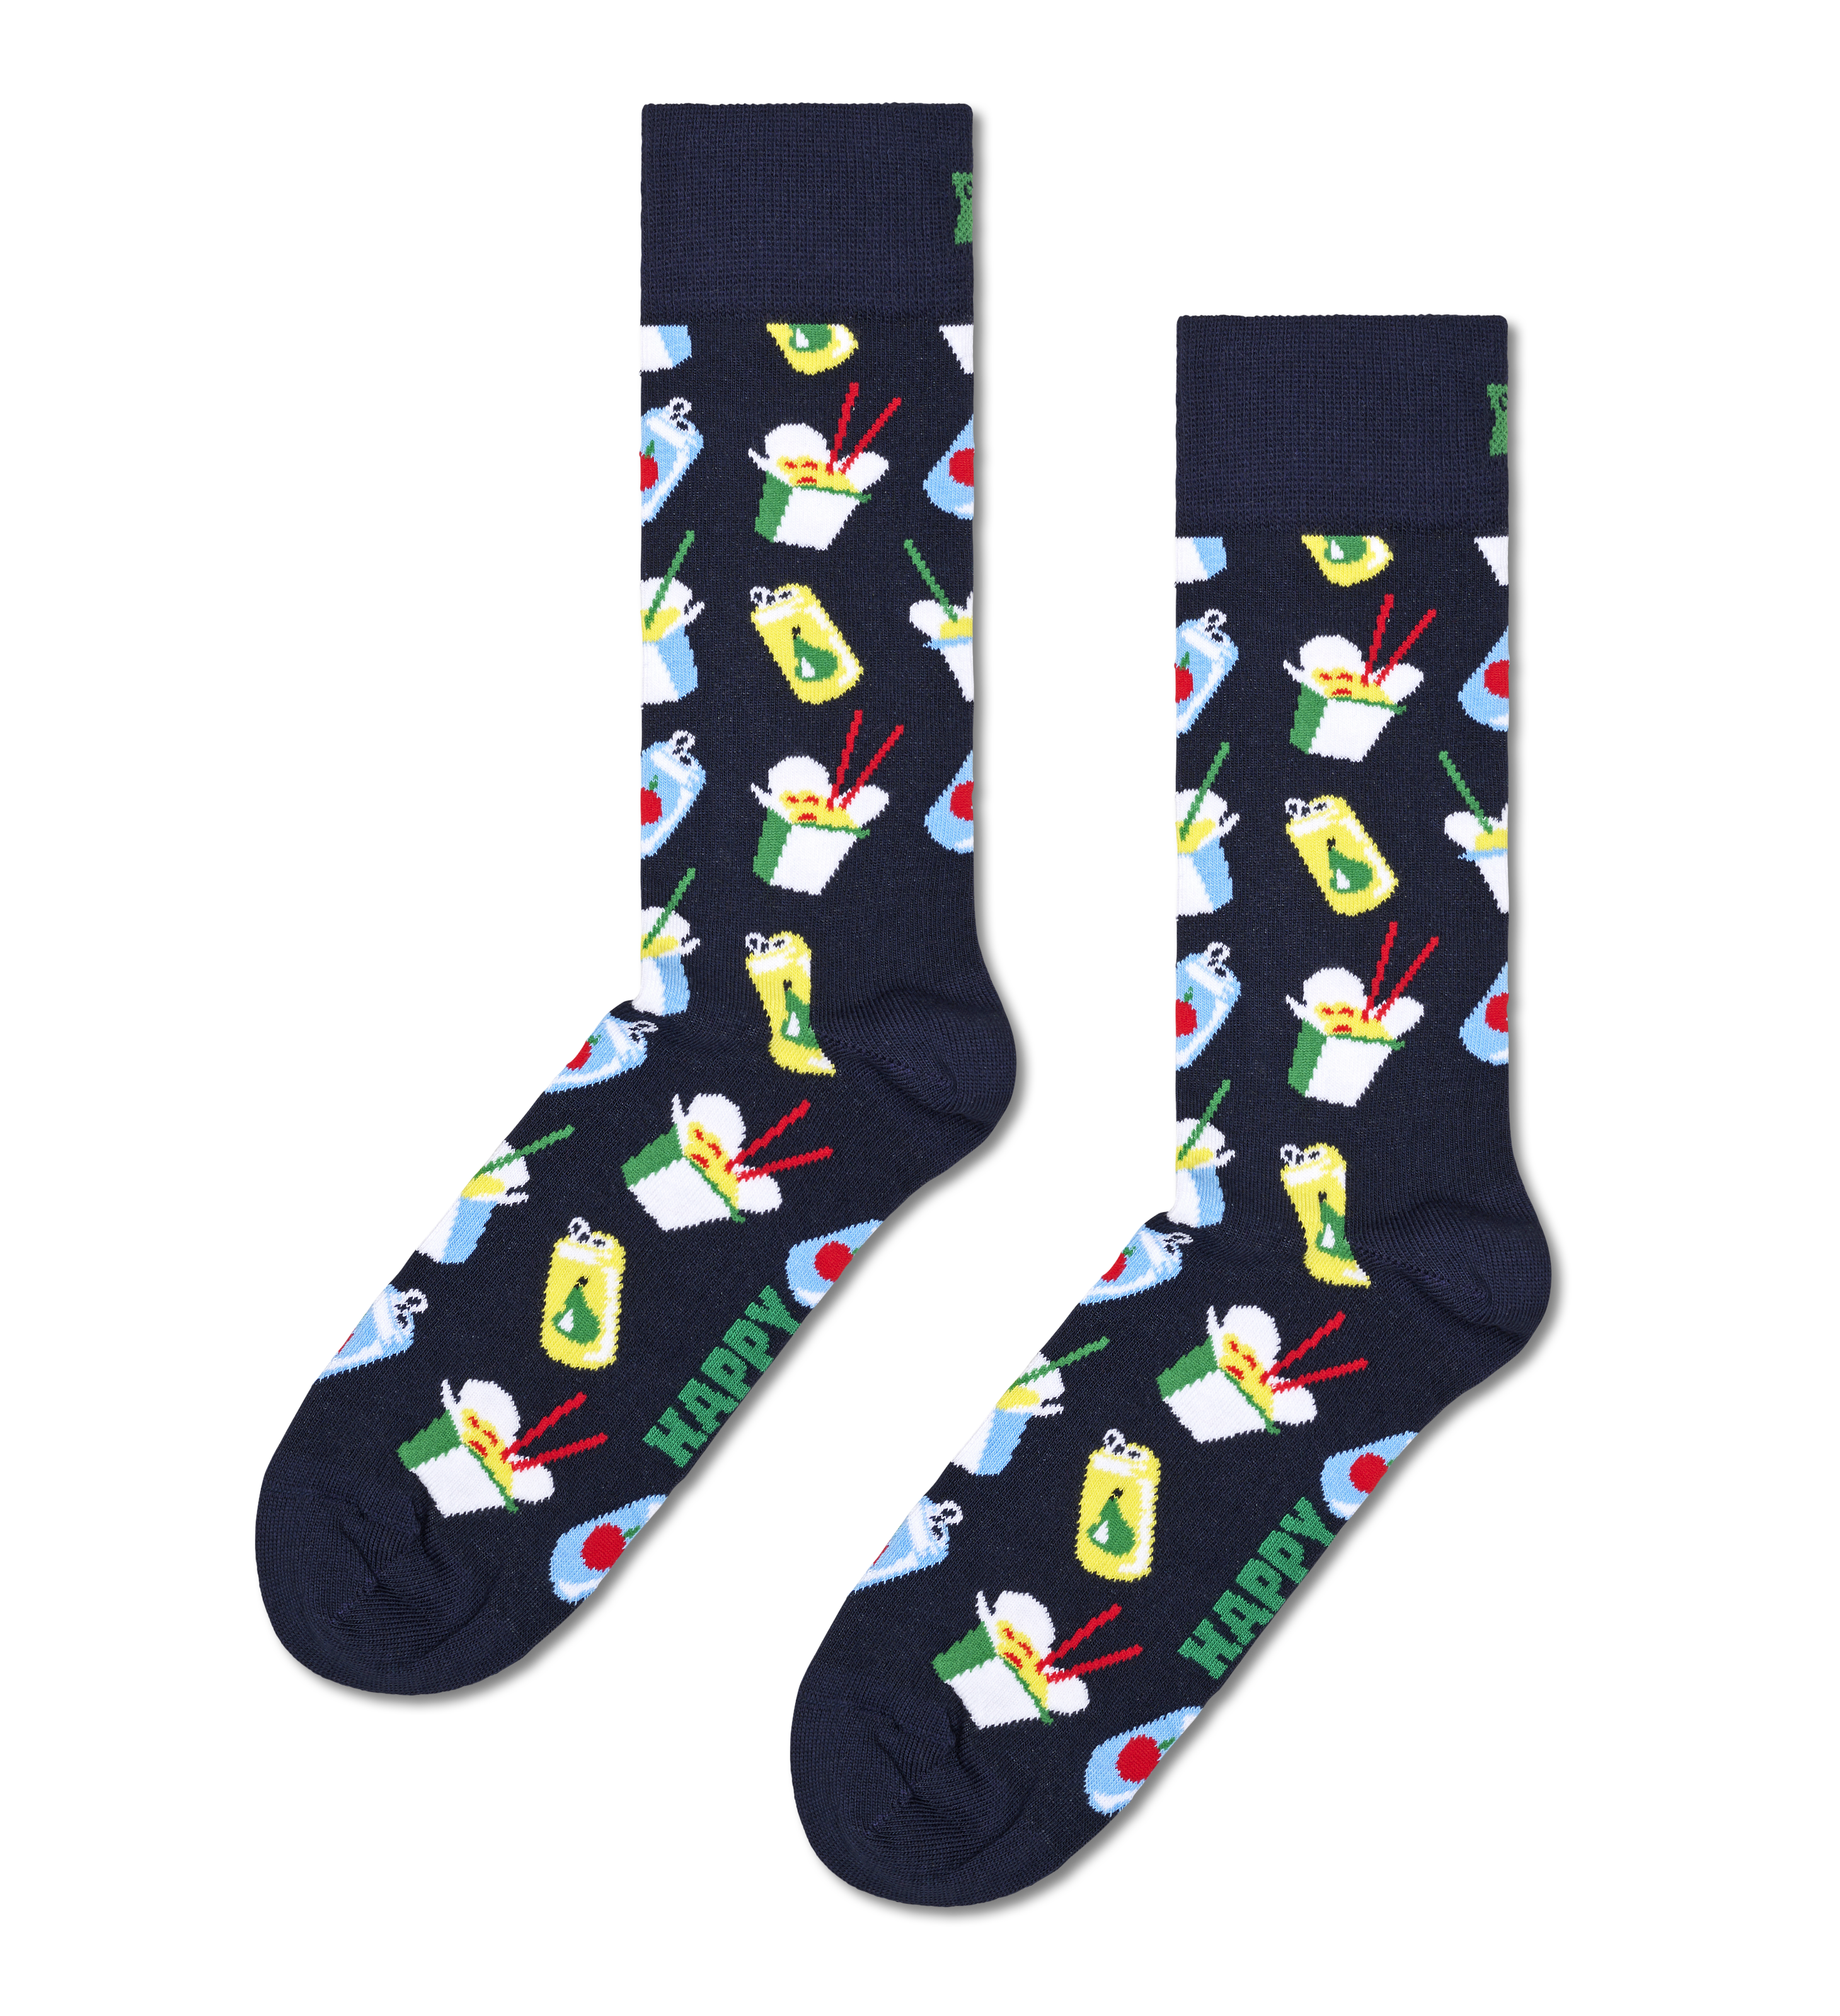 Boost your mood with these Happy Socks!